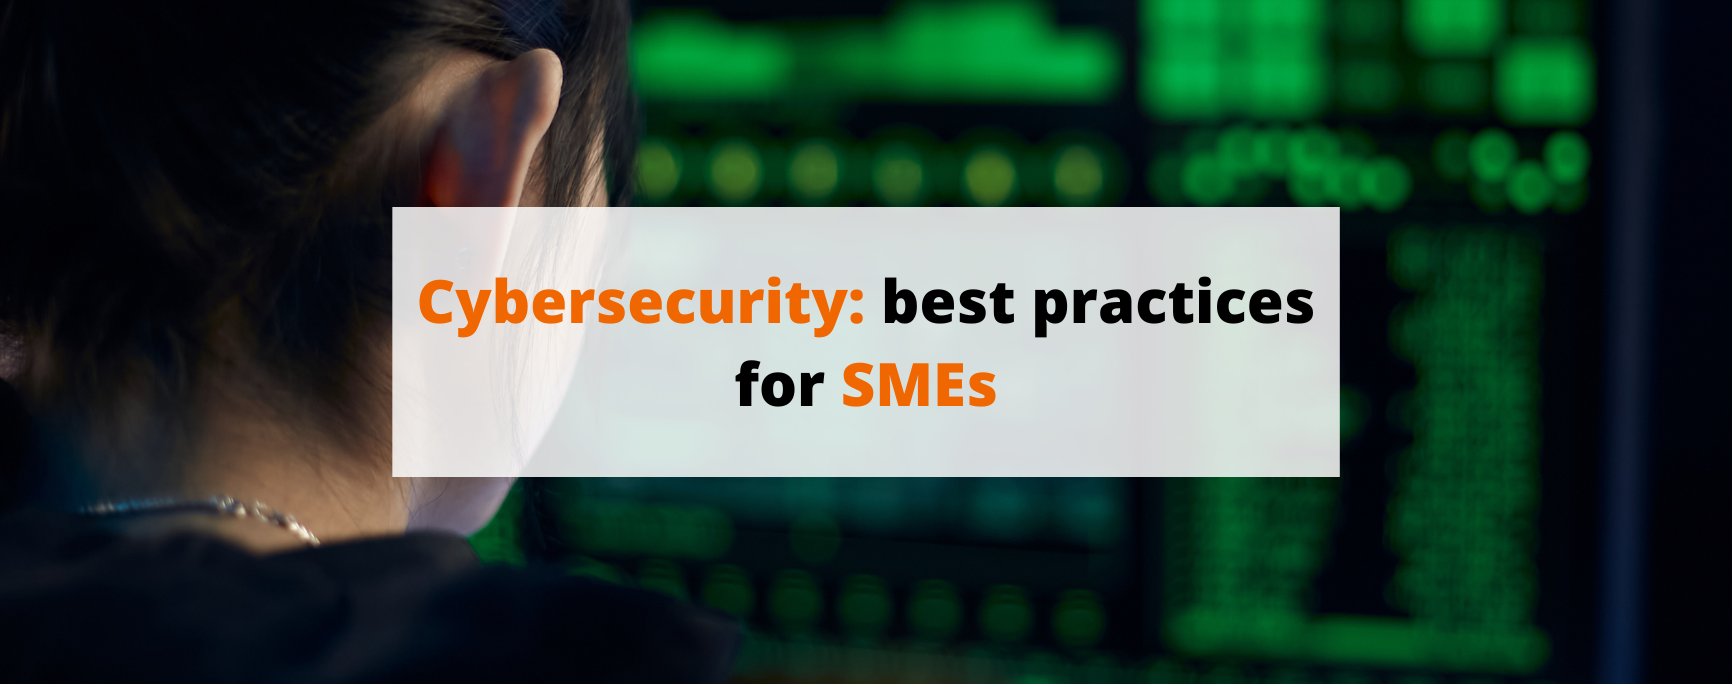 Cybersecurity best practices for SMEs